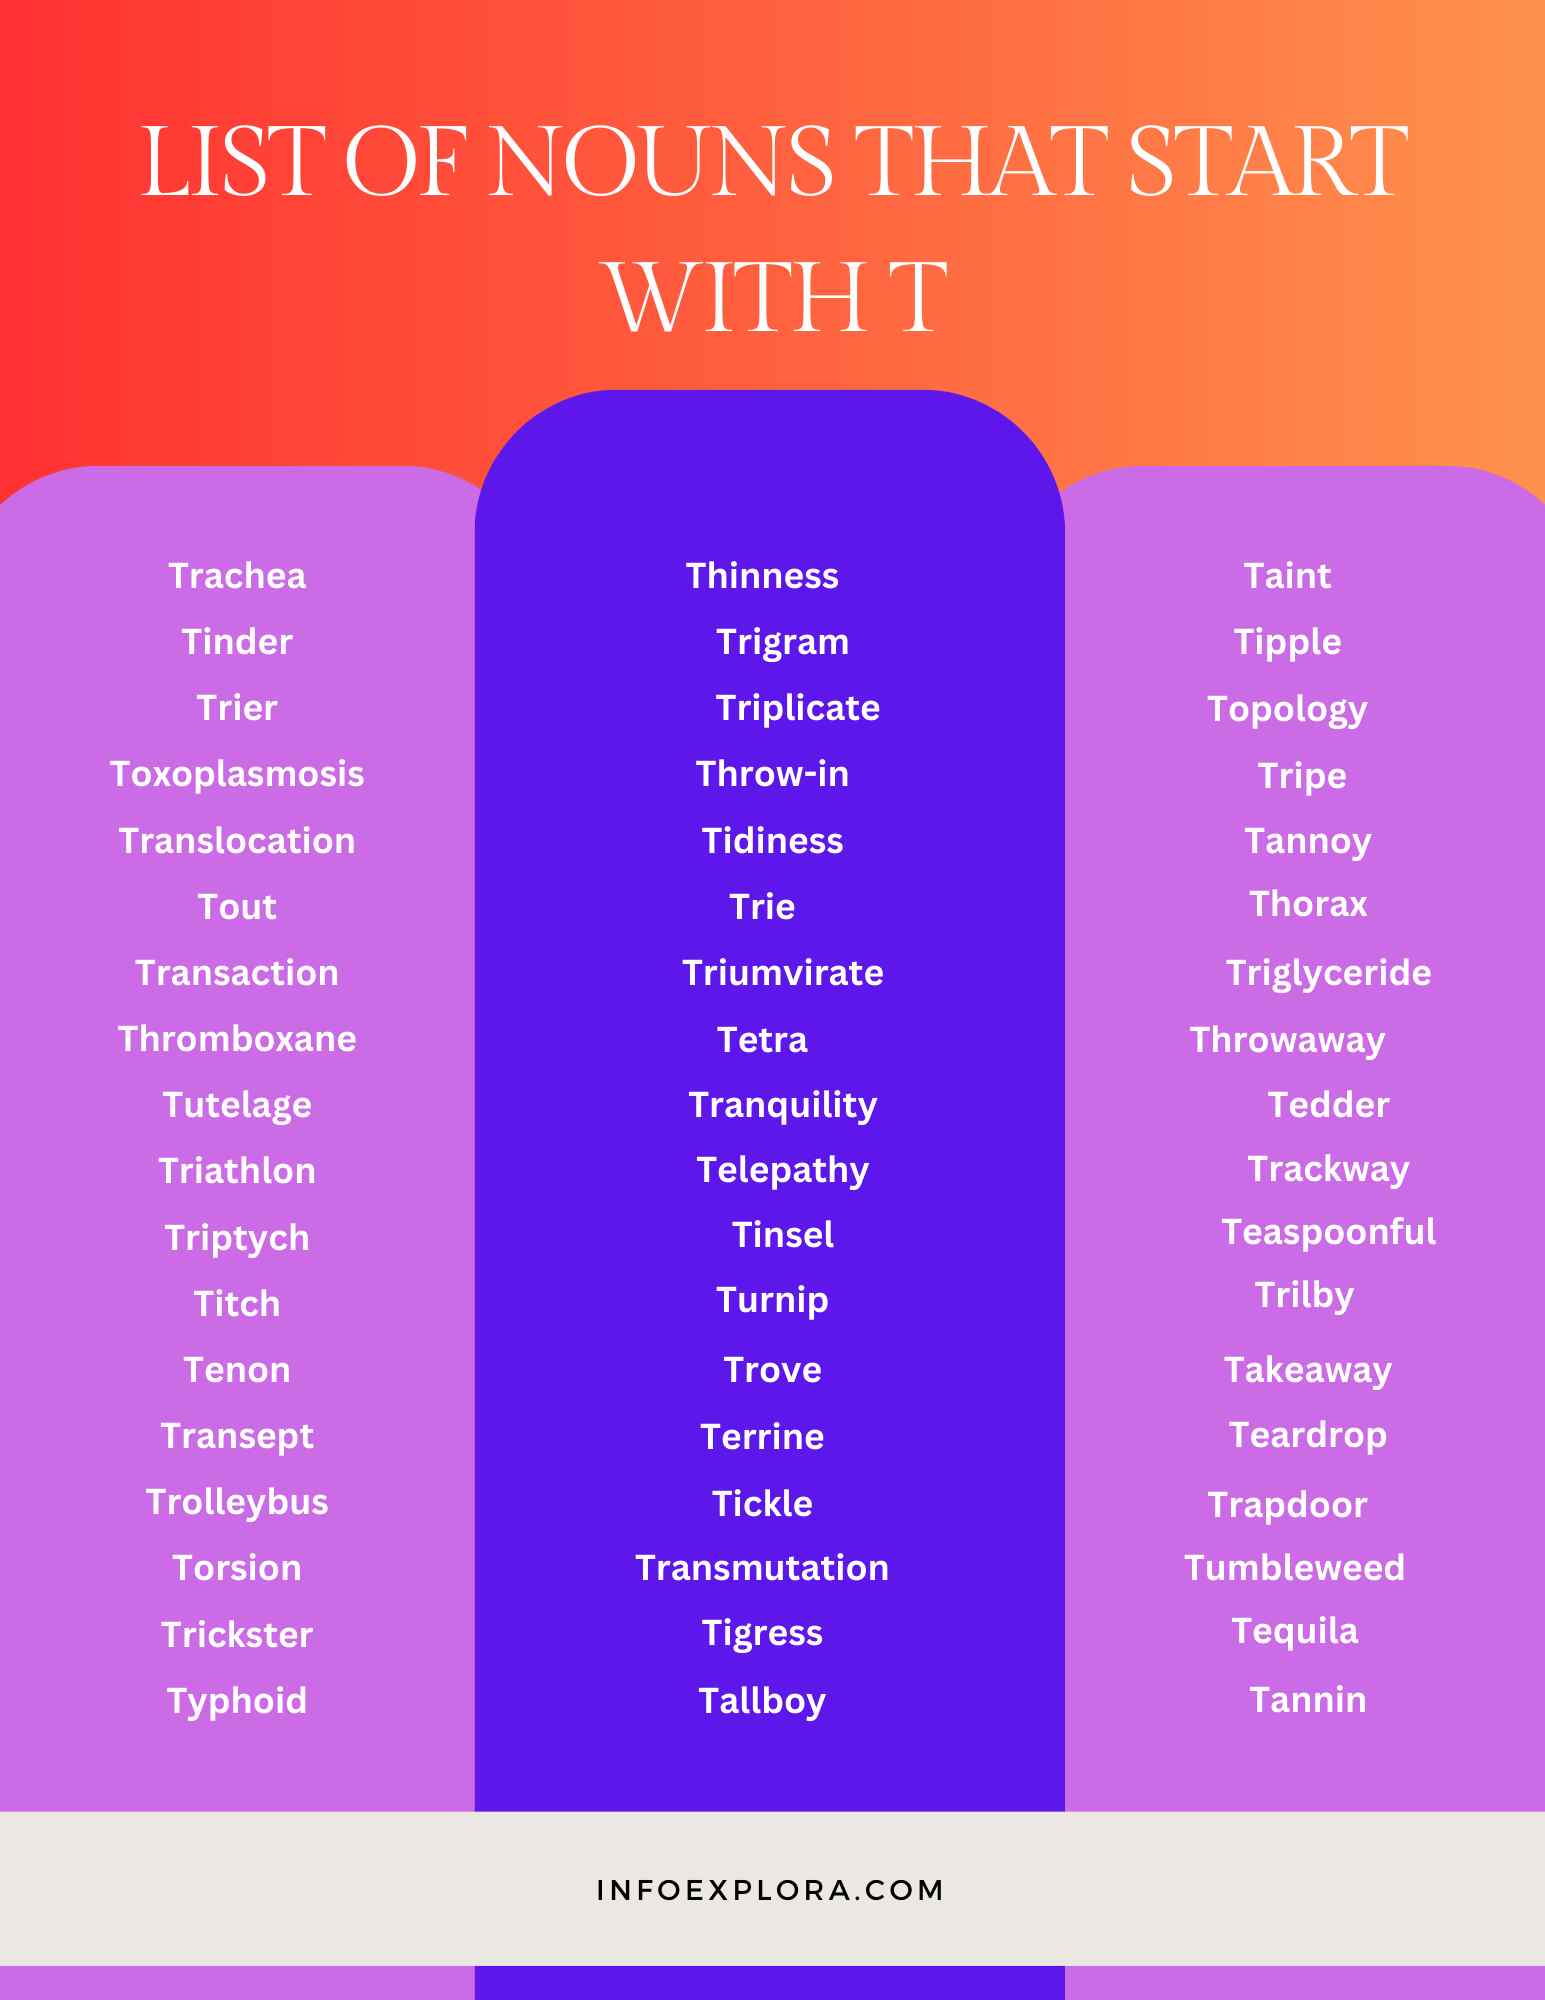 Nouns that Start With T